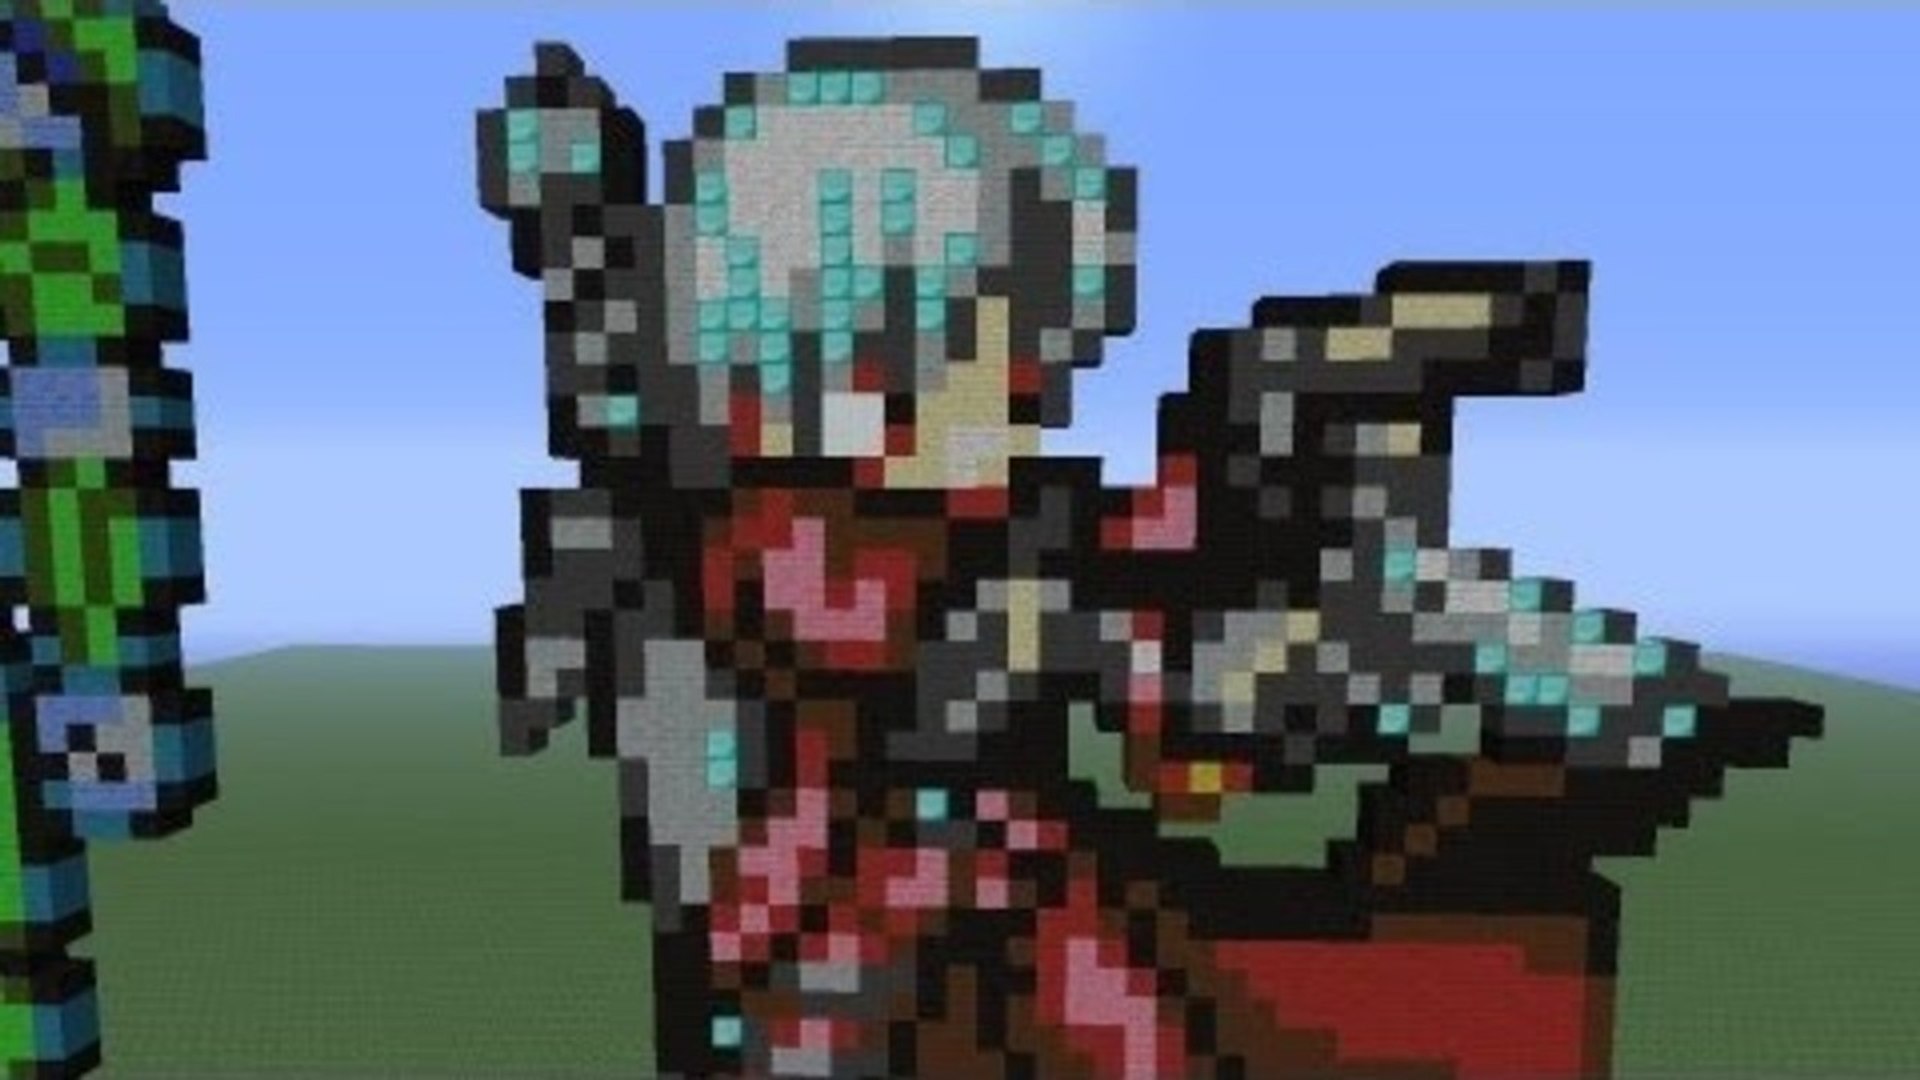 Pixel art of dante from devil may cry in battle stance